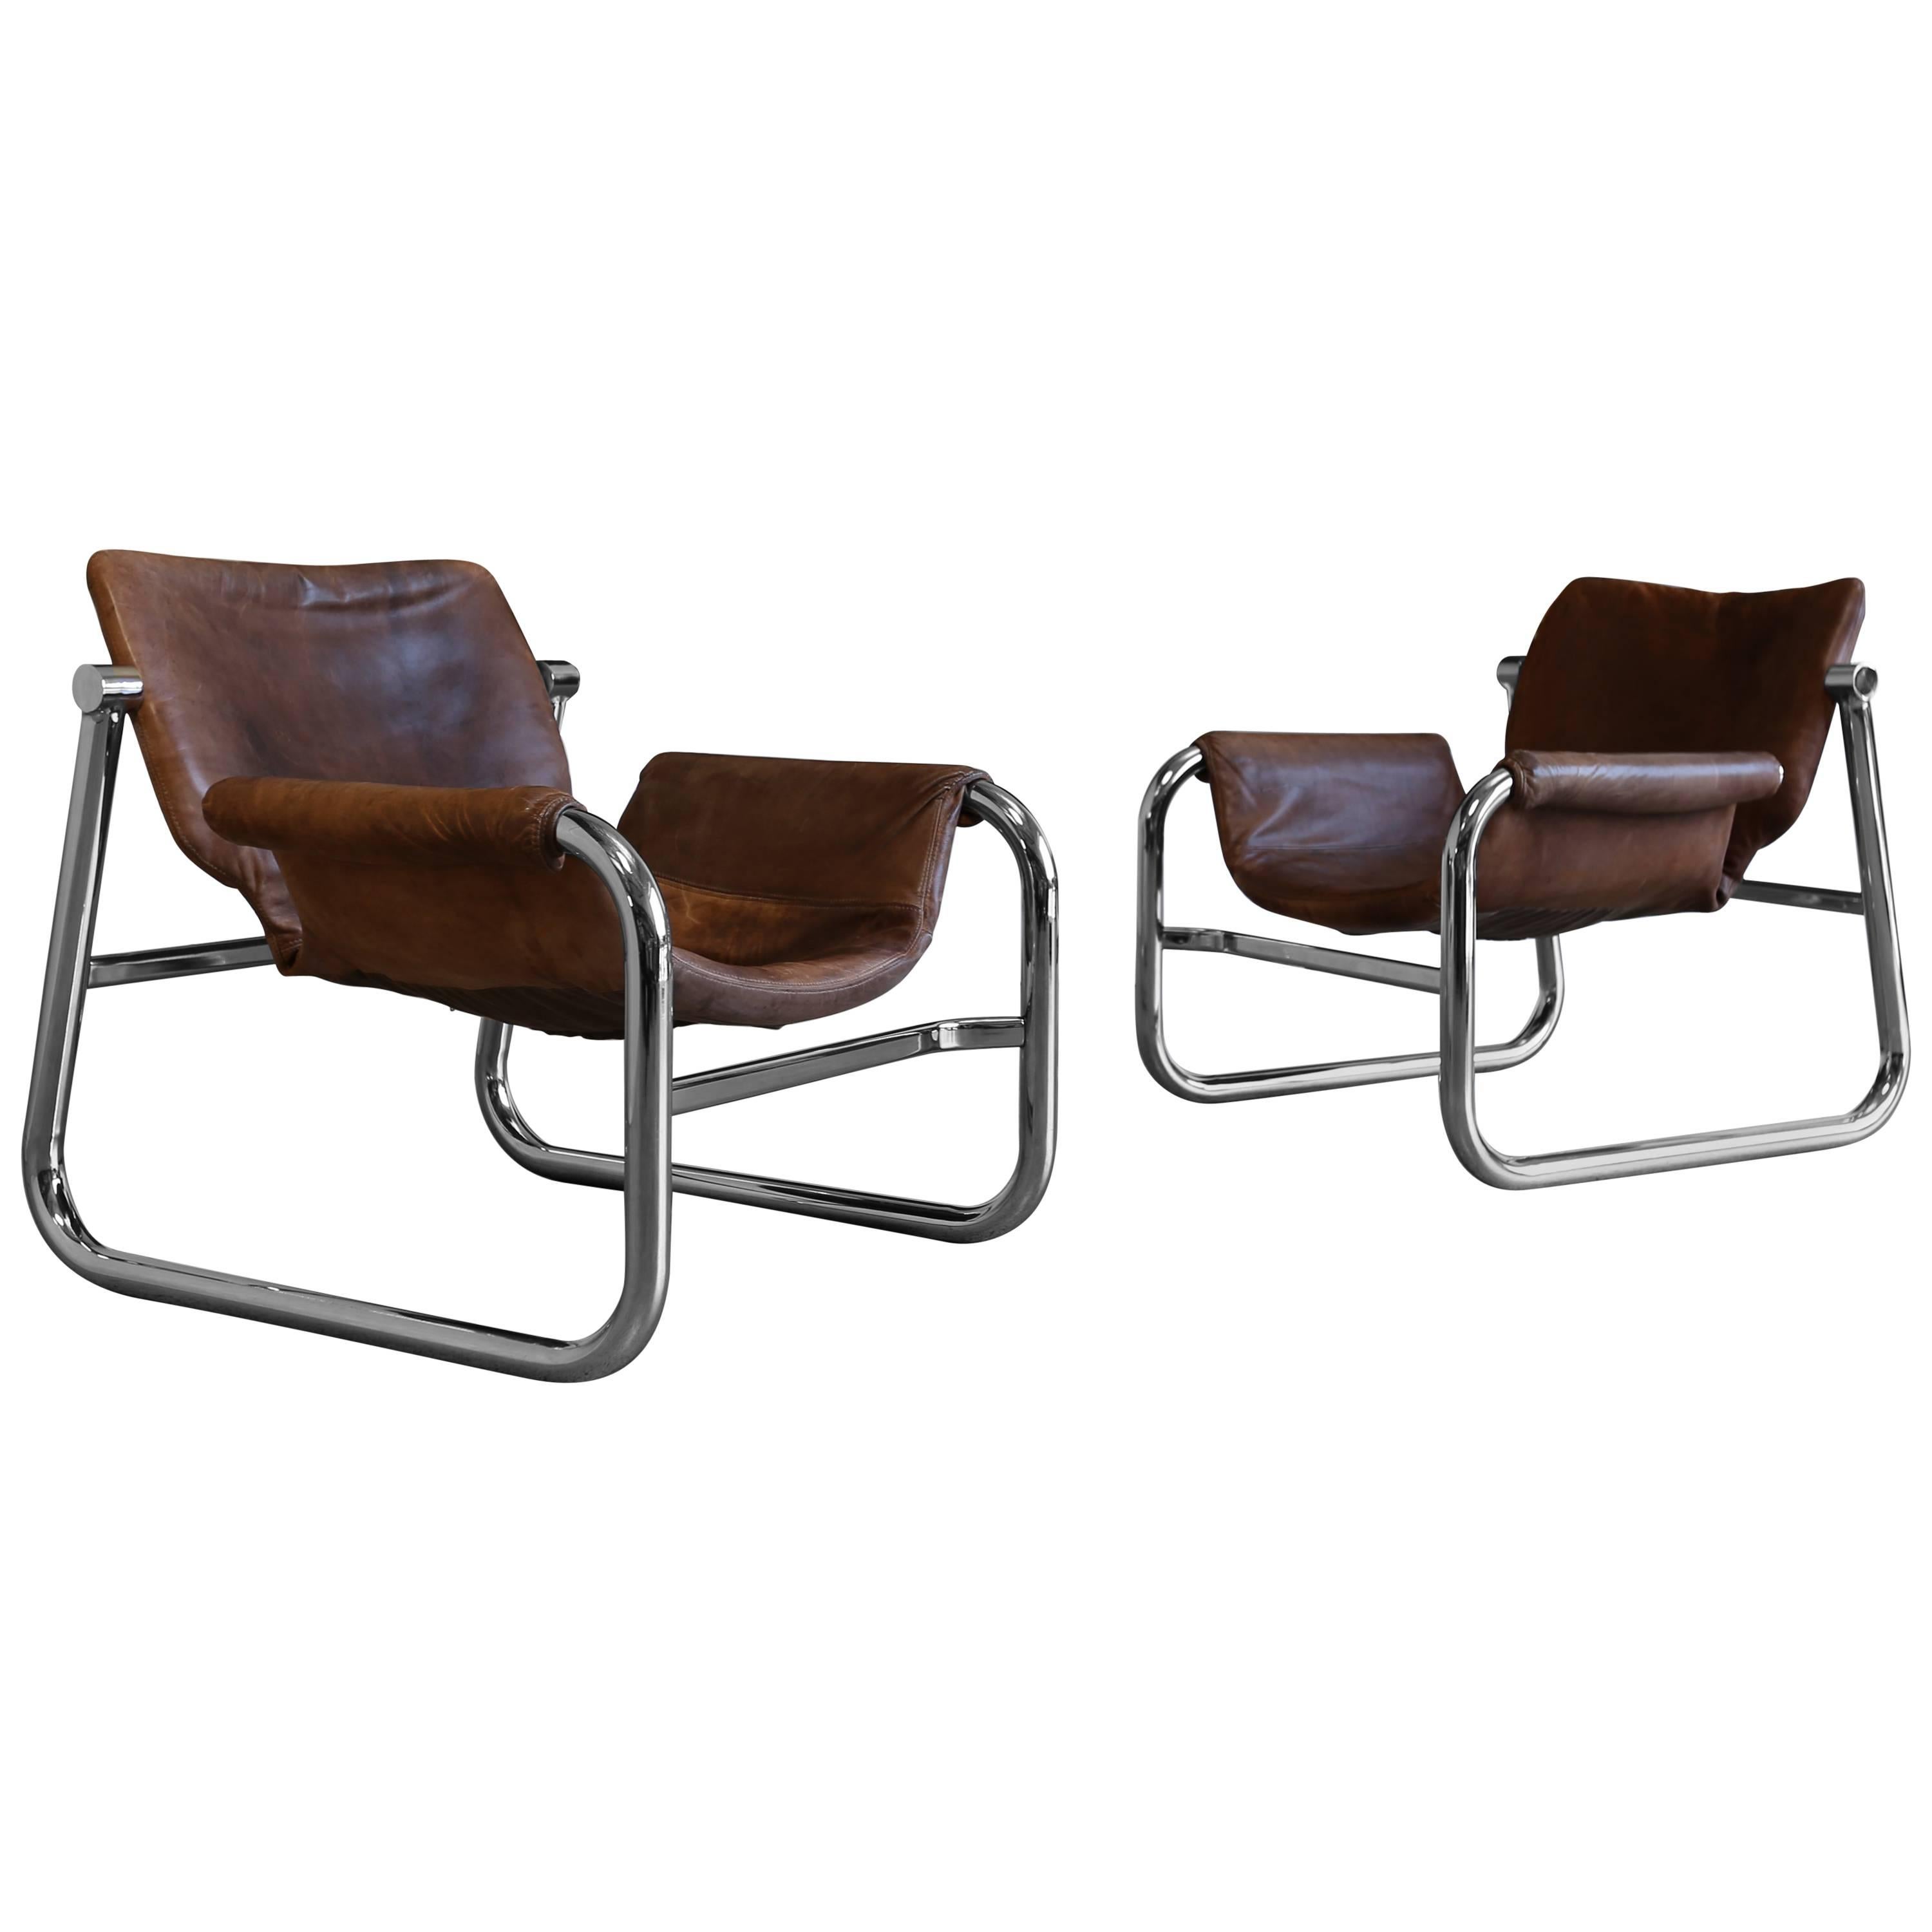 "Alpha" Lounge Chairs by Maurice Burke for Pozza